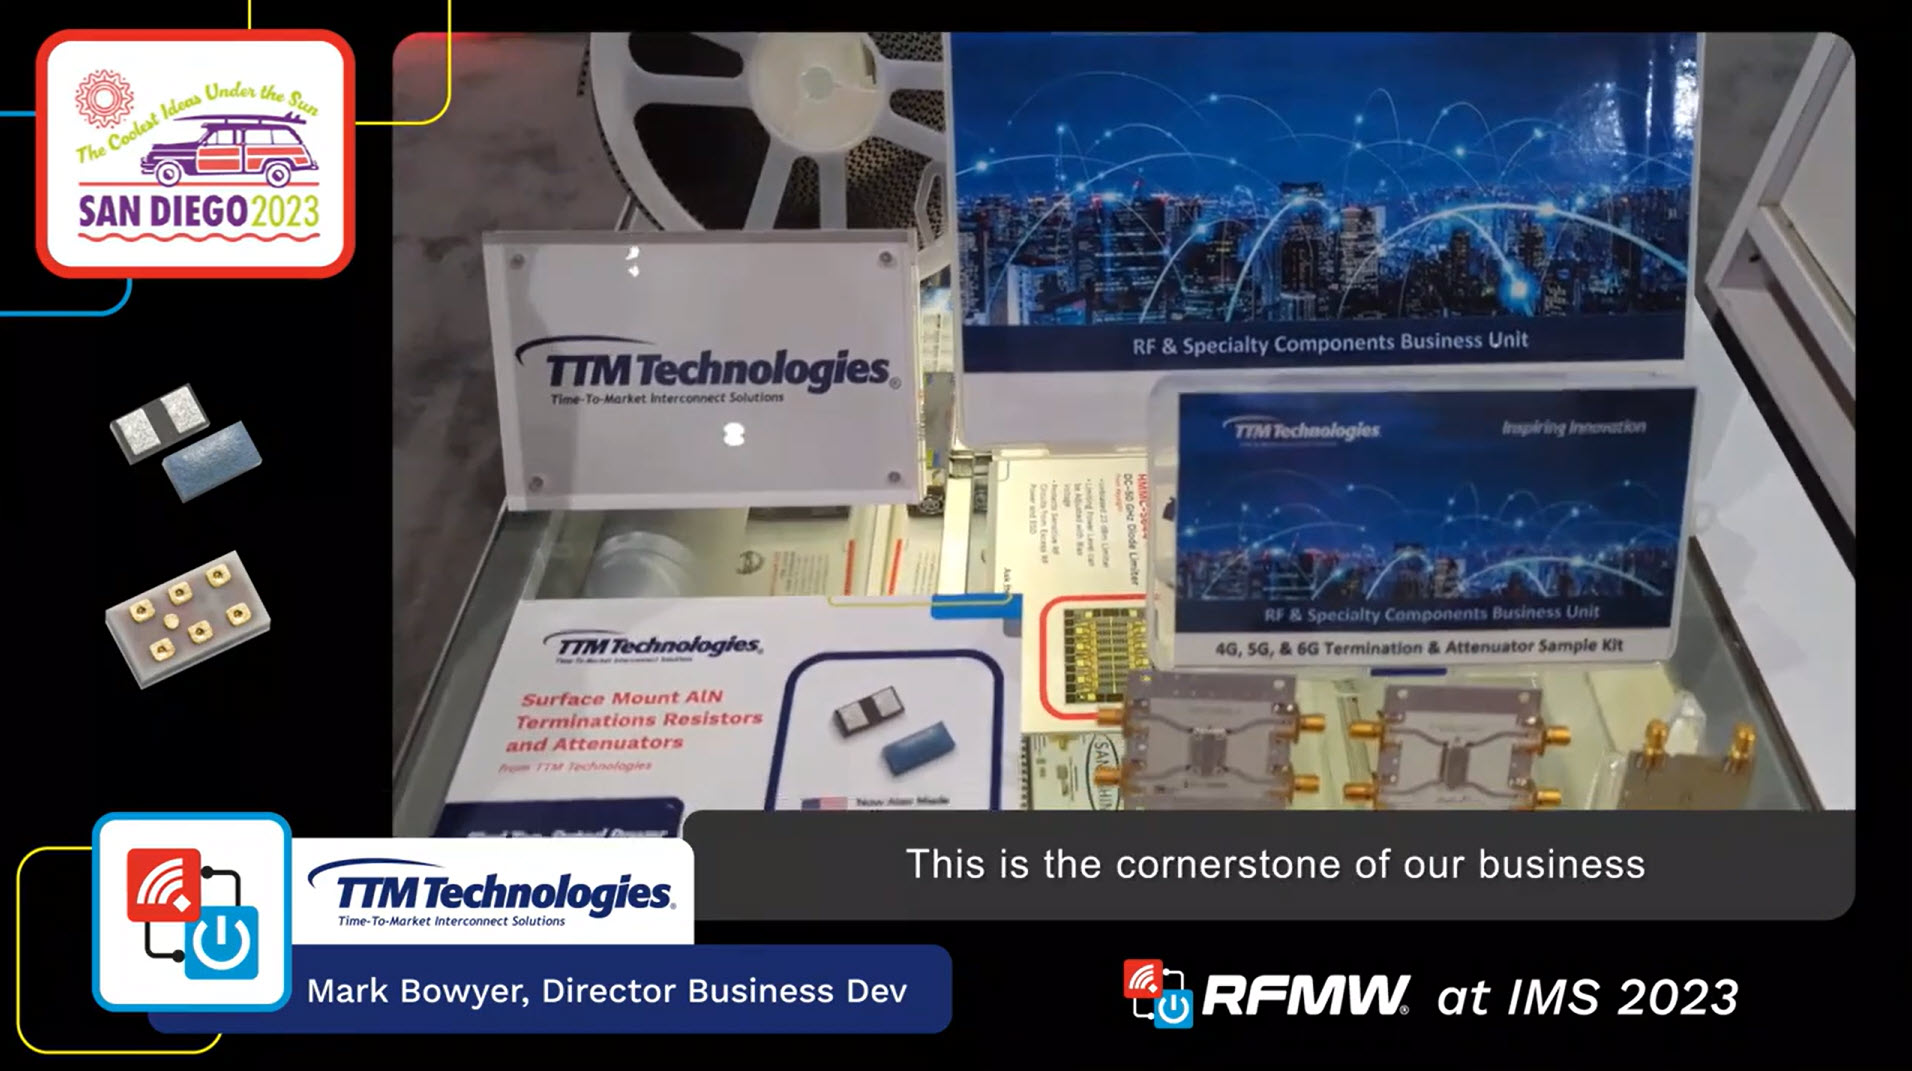 TTM Technologies speaks to RFMW about some of their exciting new products at the RFMW Booth at IMS 2023.